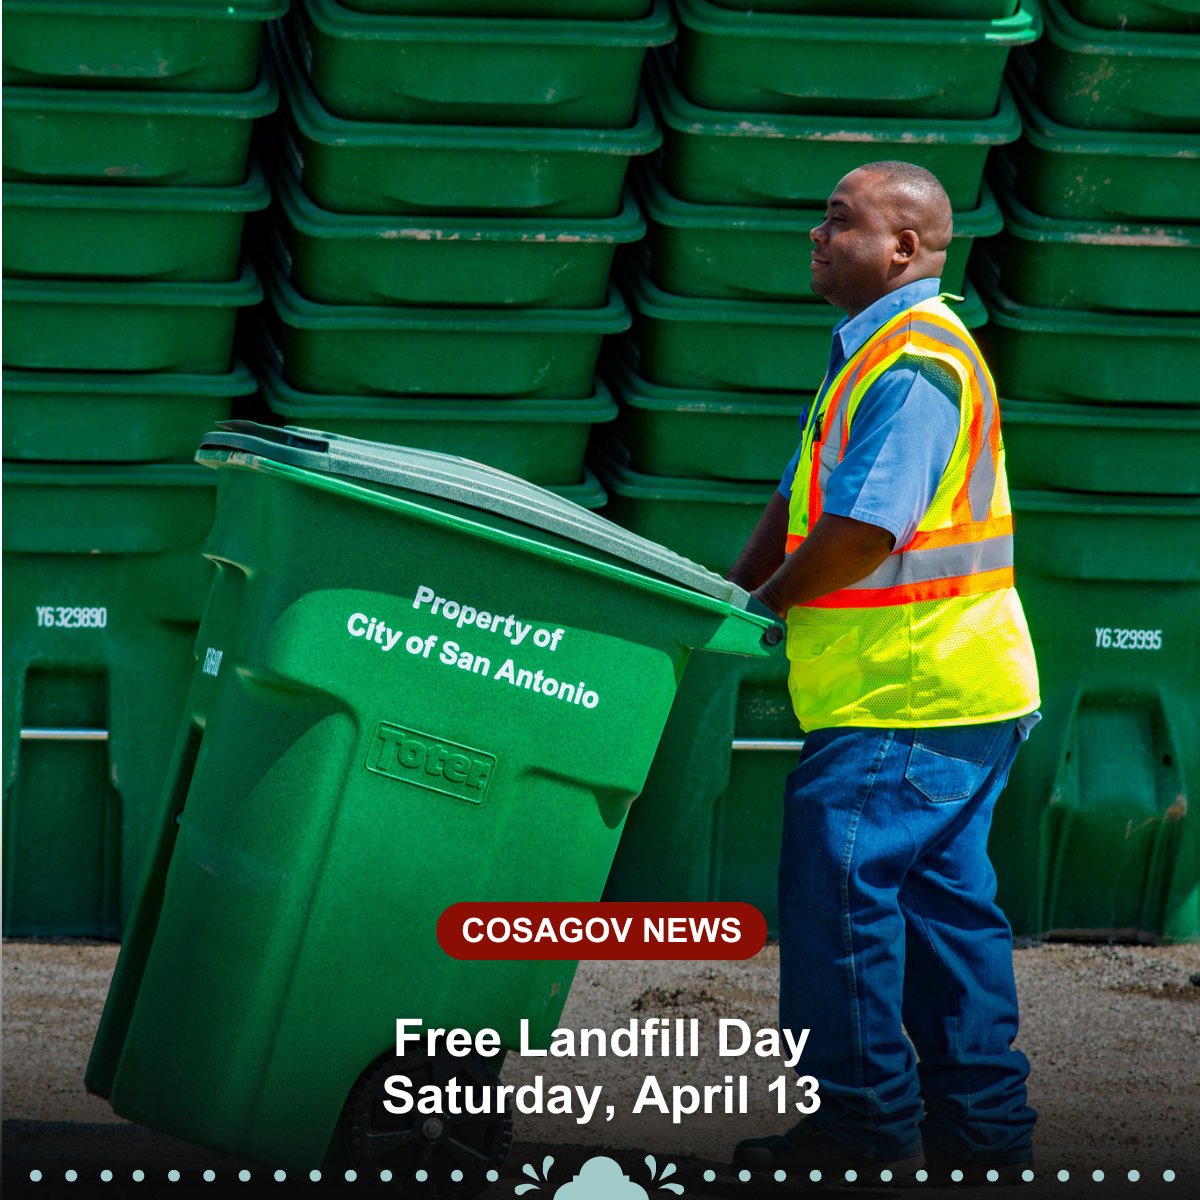 The City of San Antonio Solid Waste Management Department (SWMD) is inviting its customers to a free landfill day event this Saturday, April 13, from 8 a.m. to 1 p.m. For info on locations and eligibility: sa.gov/Directory/News…